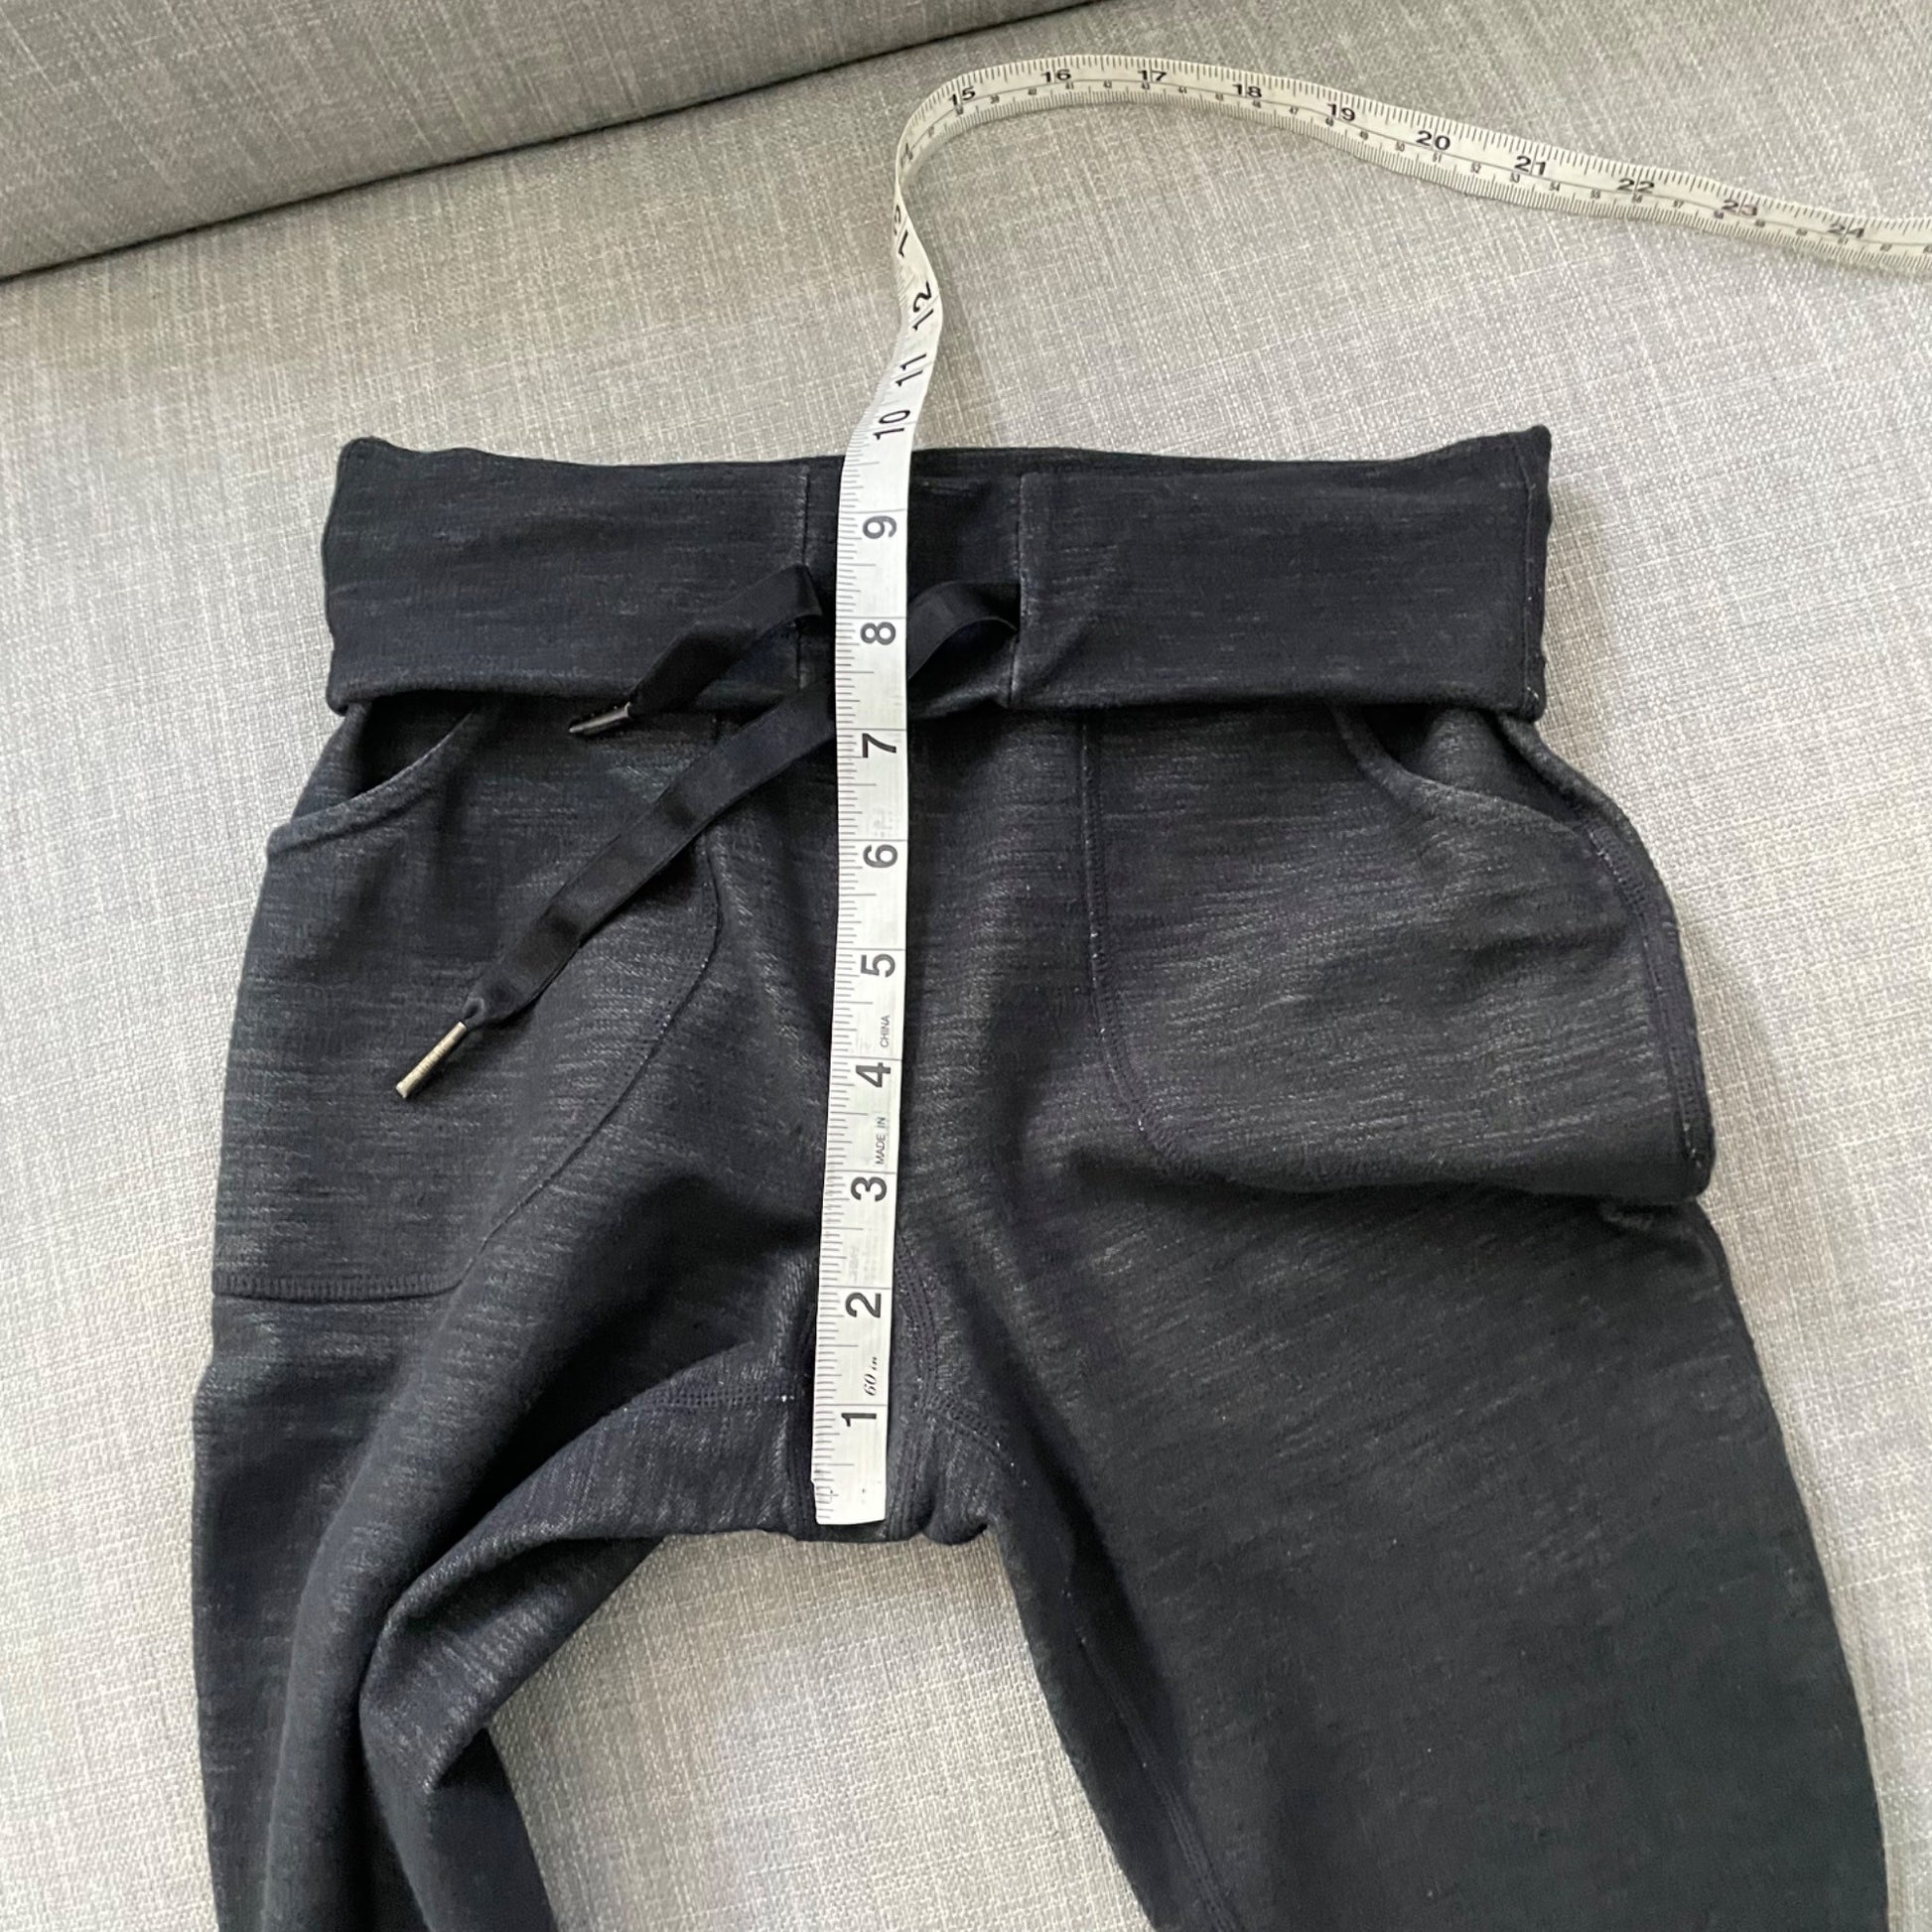 Lululemon Skinny Will Pant in Pique Luon Gray Pockets Women's Size 2 A –  Becky Park